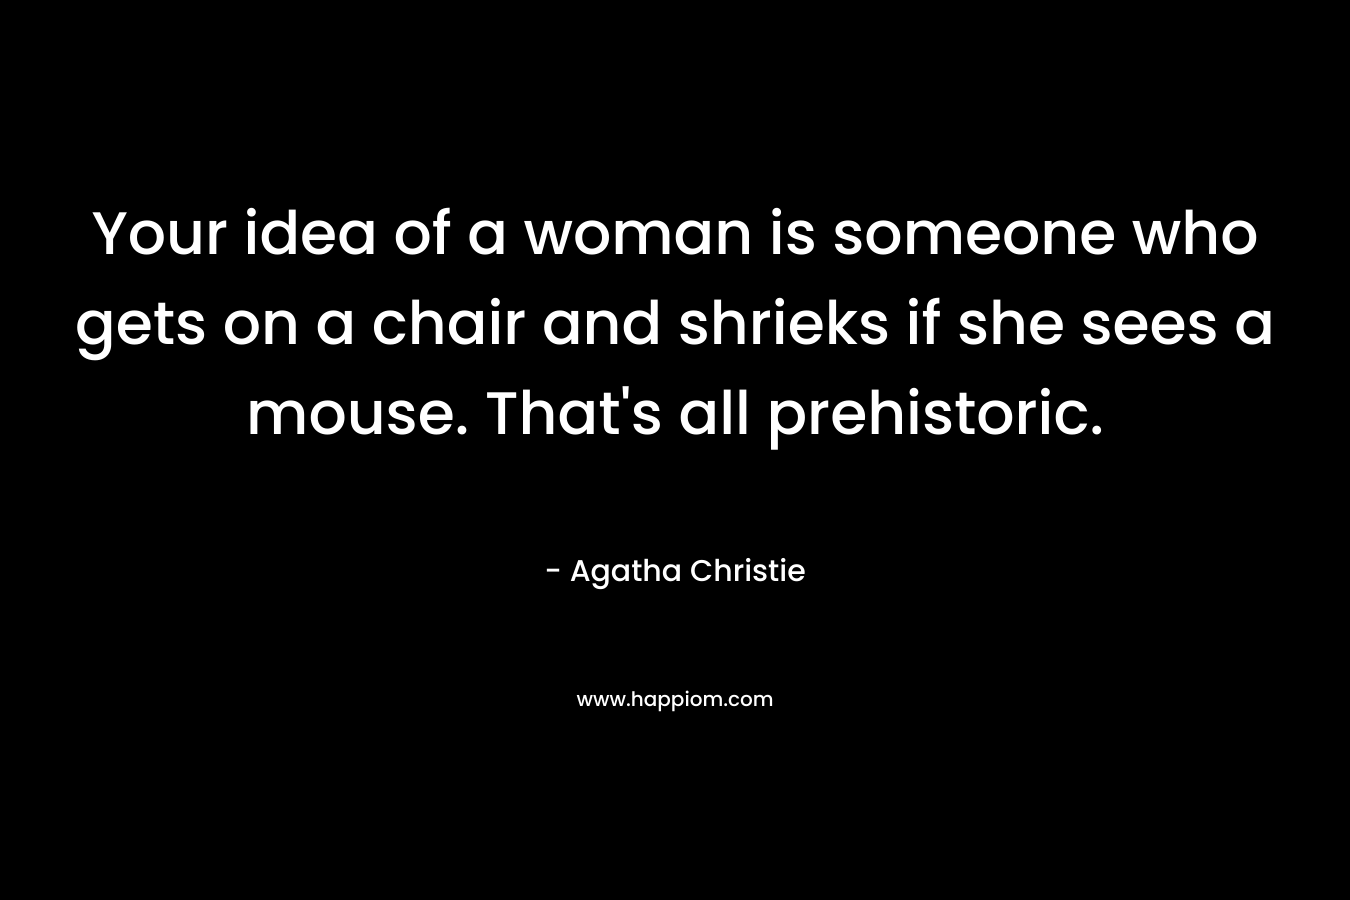 Your idea of a woman is someone who gets on a chair and shrieks if she sees a mouse. That’s all prehistoric. – Agatha Christie